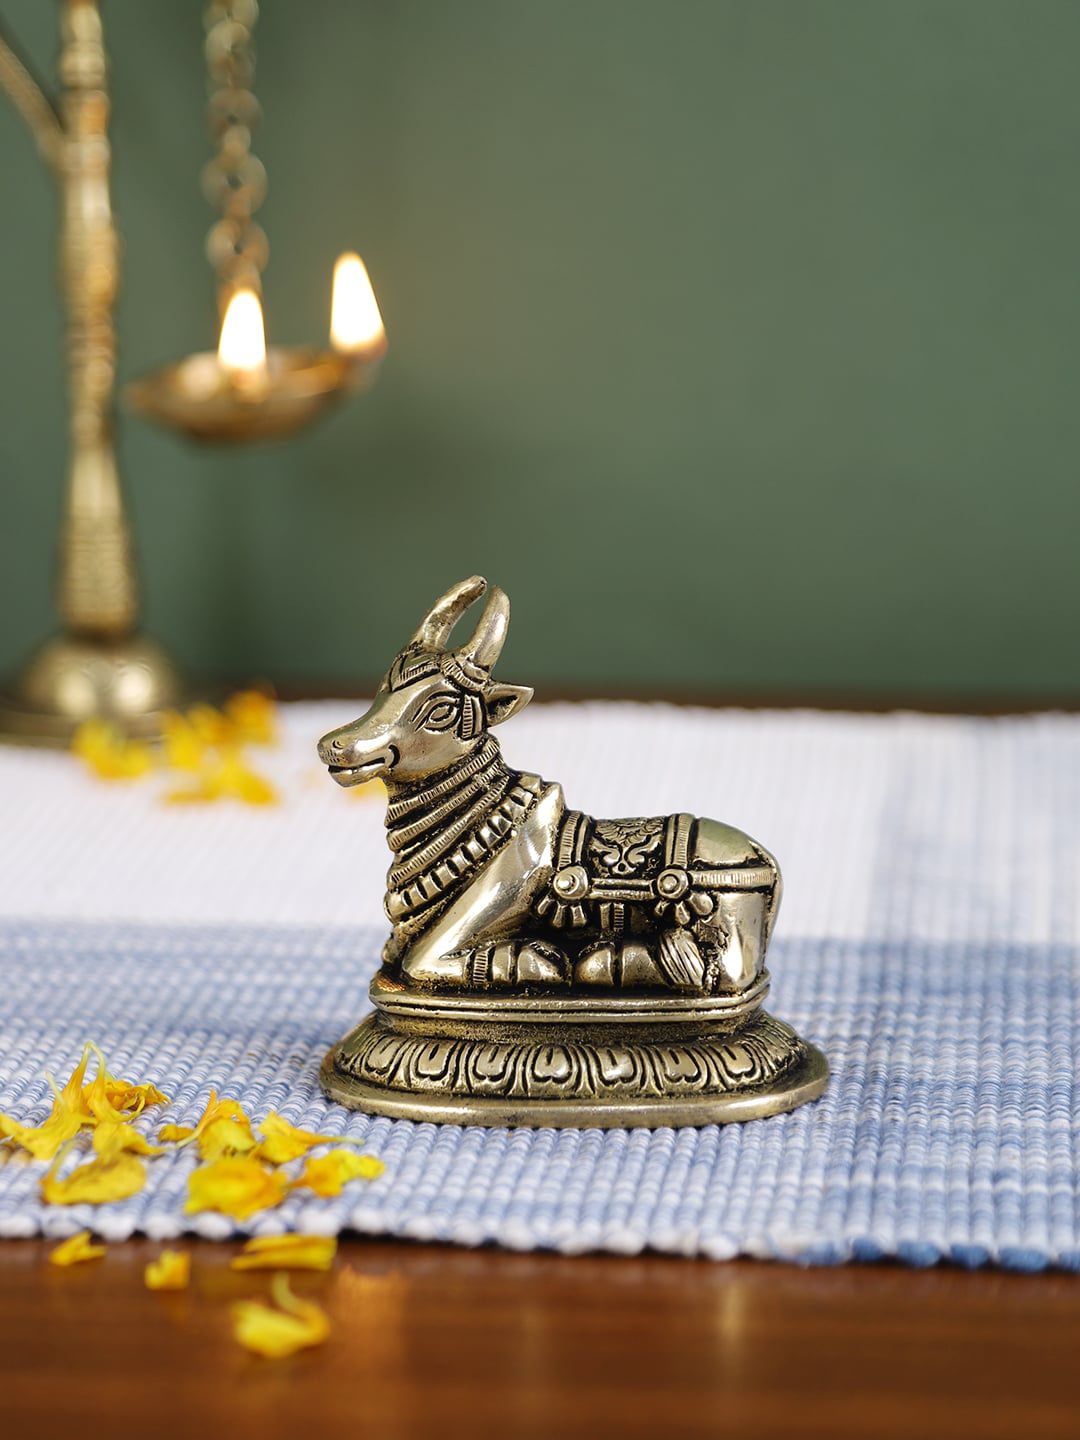 Imli Street Gold-Toned Nandi Shaped Table Showpieces Price in India